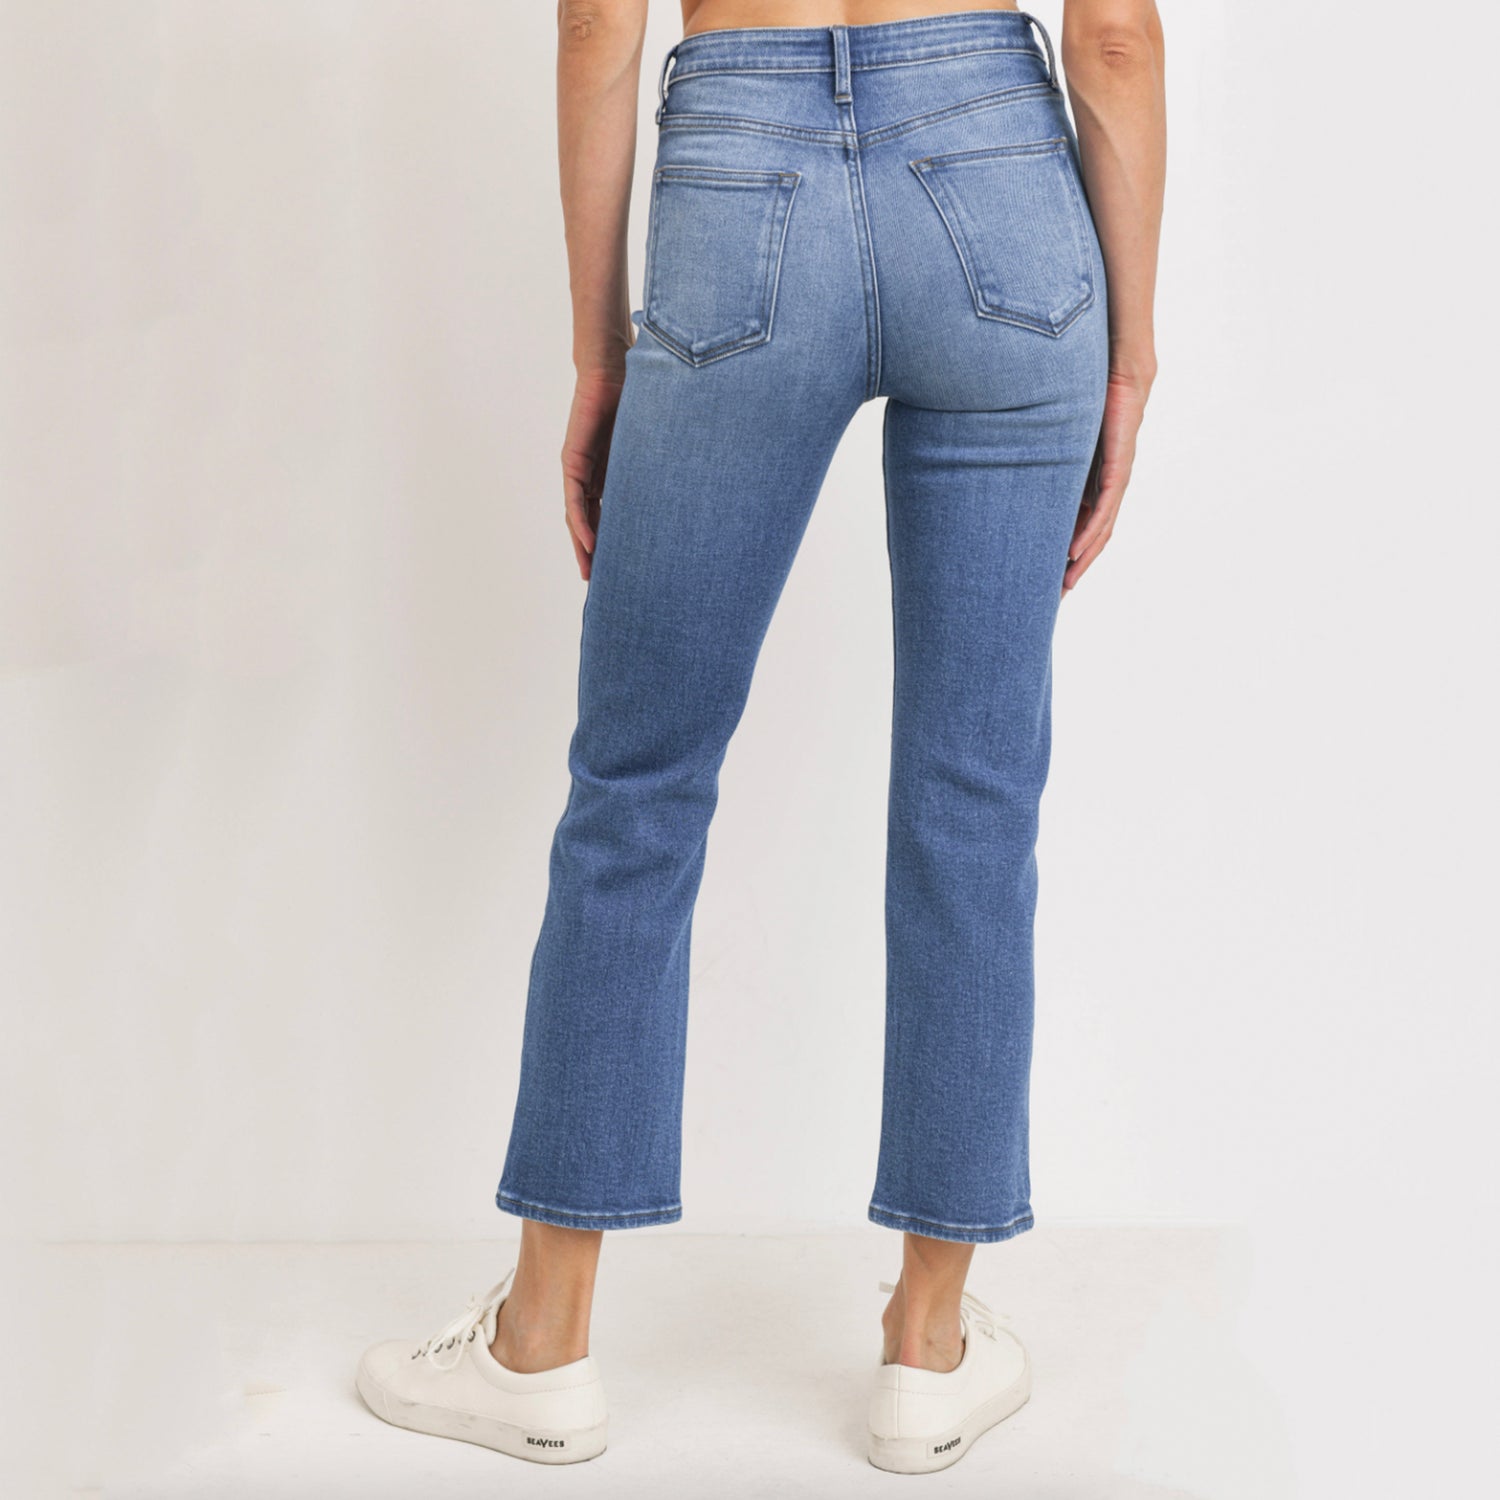 Straight Leg Knee Slit Jeans. A straight-leg, high waisted jean that can go effortlessly from a Monday in the office to Sunday at the farmers market. A medium rinse and subtle knee slits make these jeans a versatile pair that will take you places